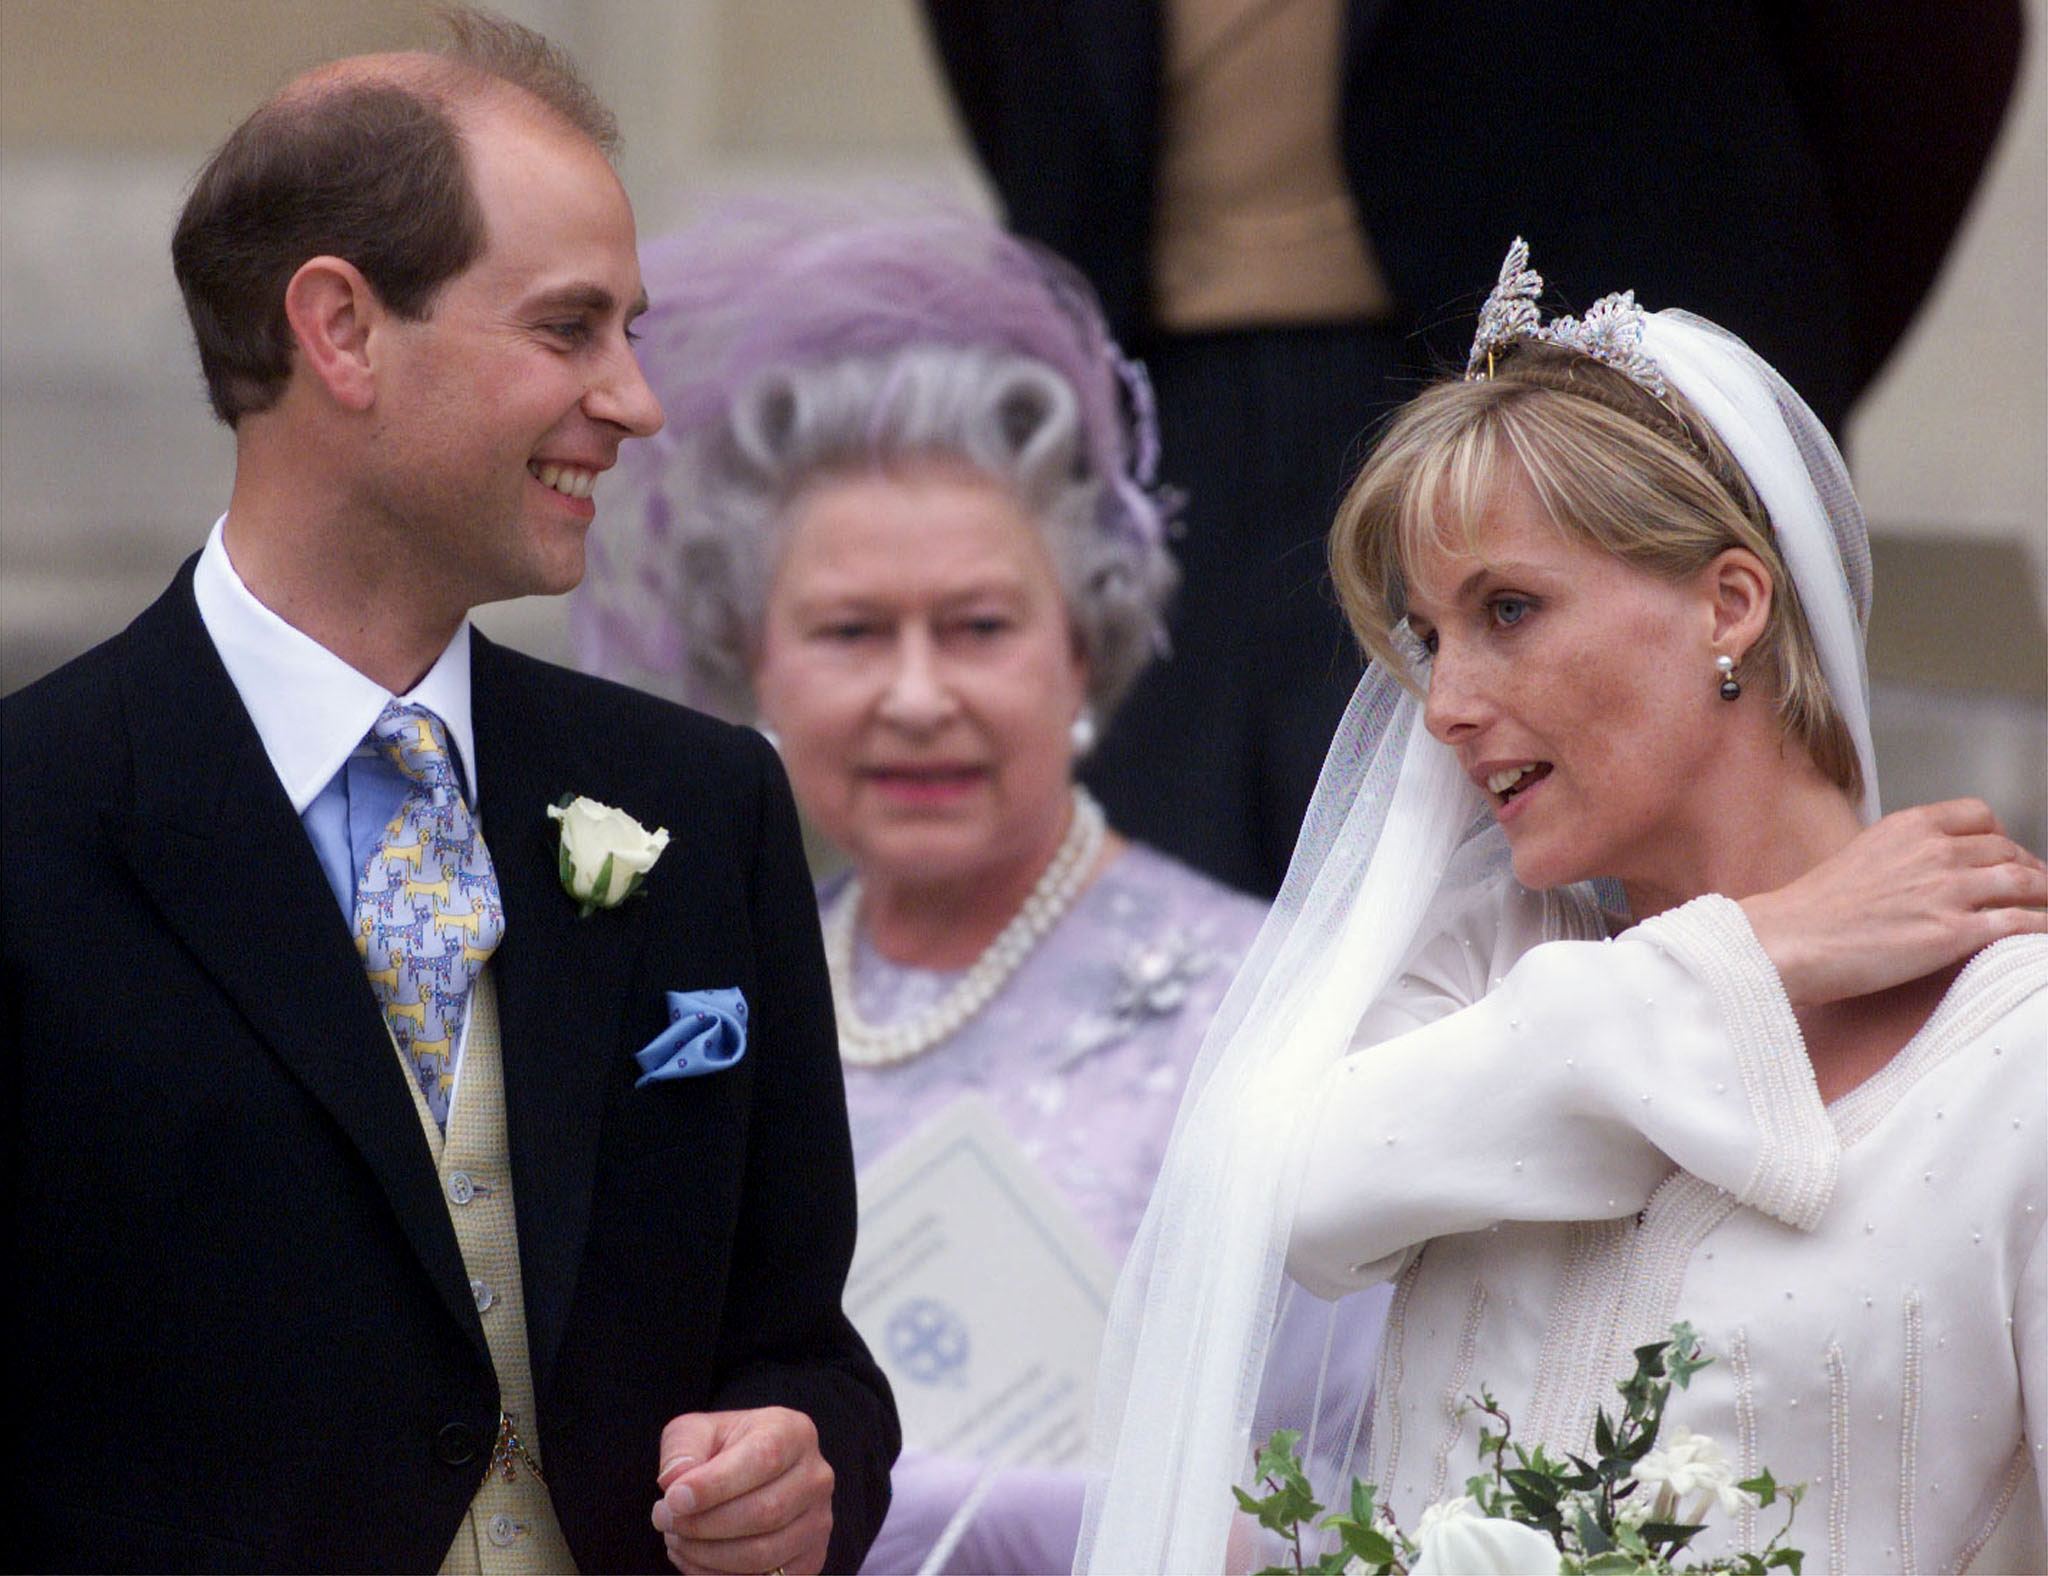 Prince Edward and wife Sophie, with Queen Elizabeth in the background